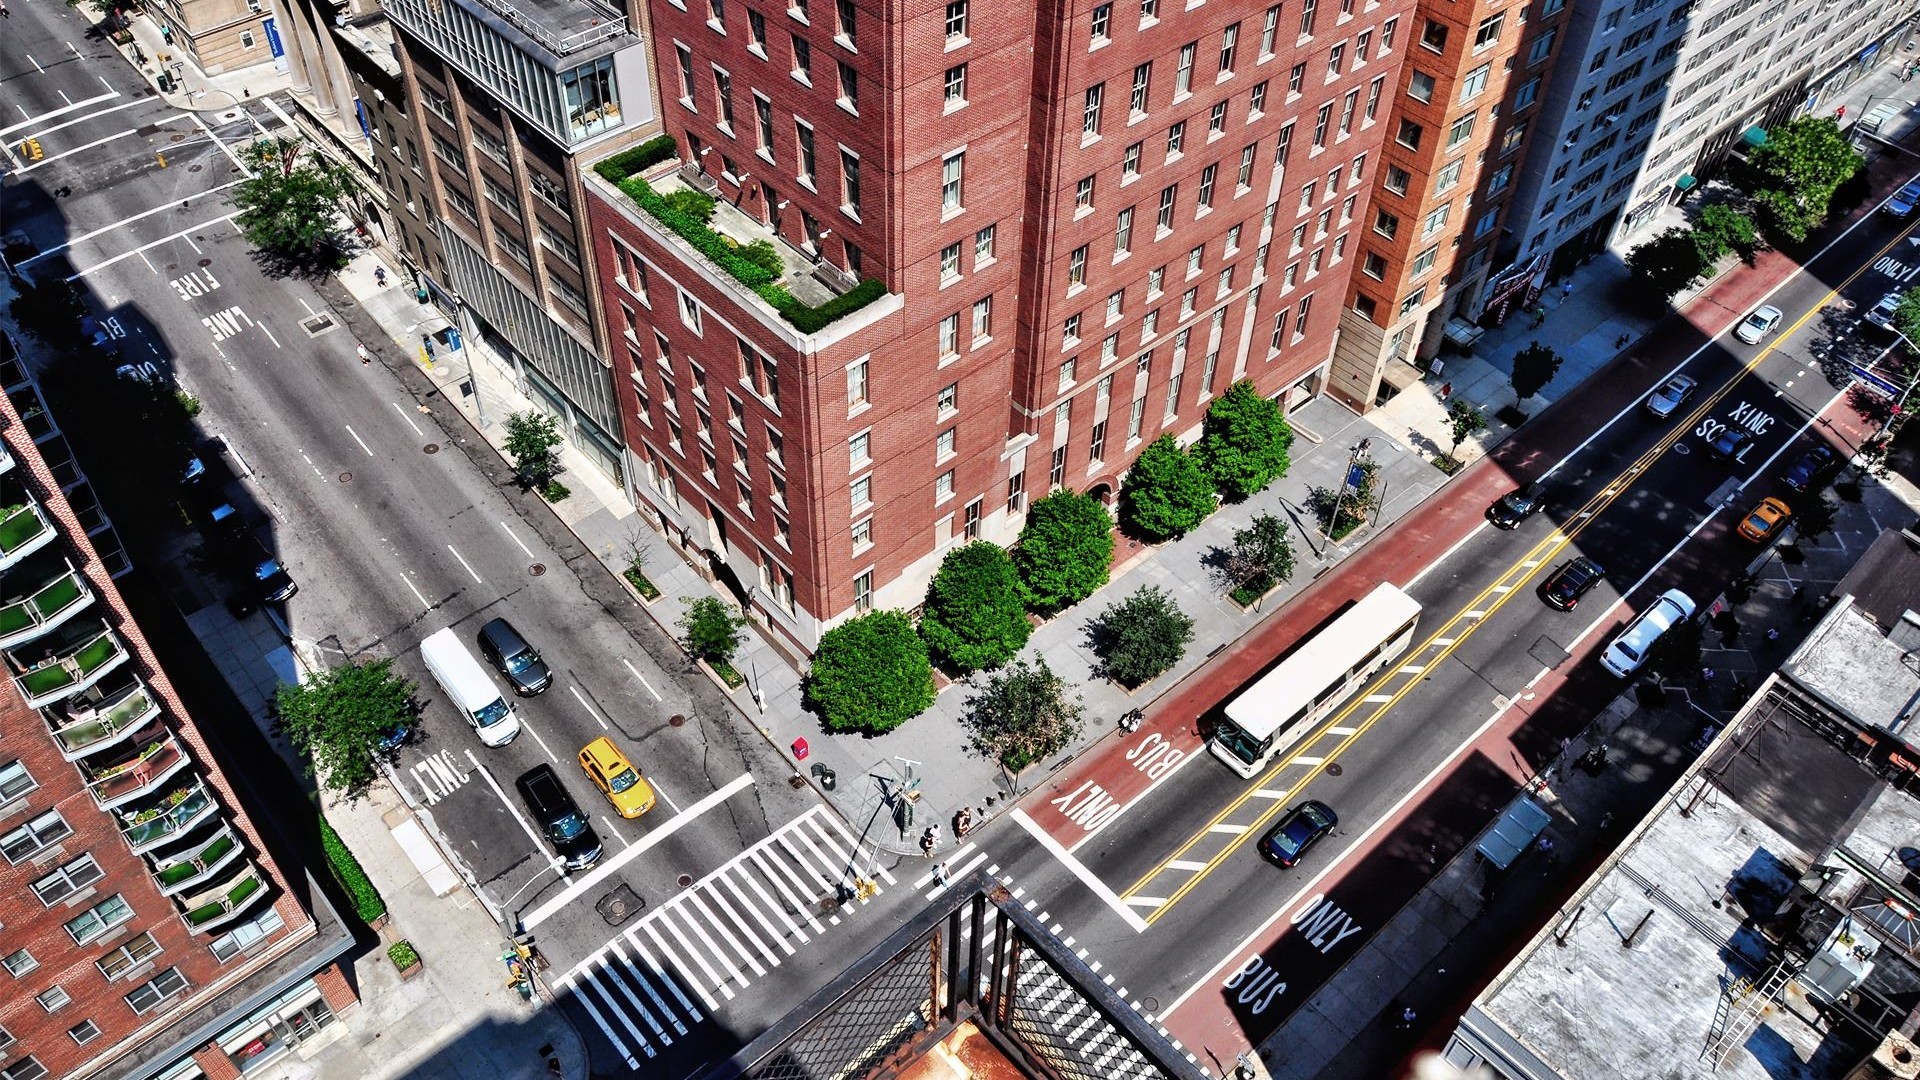 General 1920x1080 cityscape building road balcony intersections apartments high angle